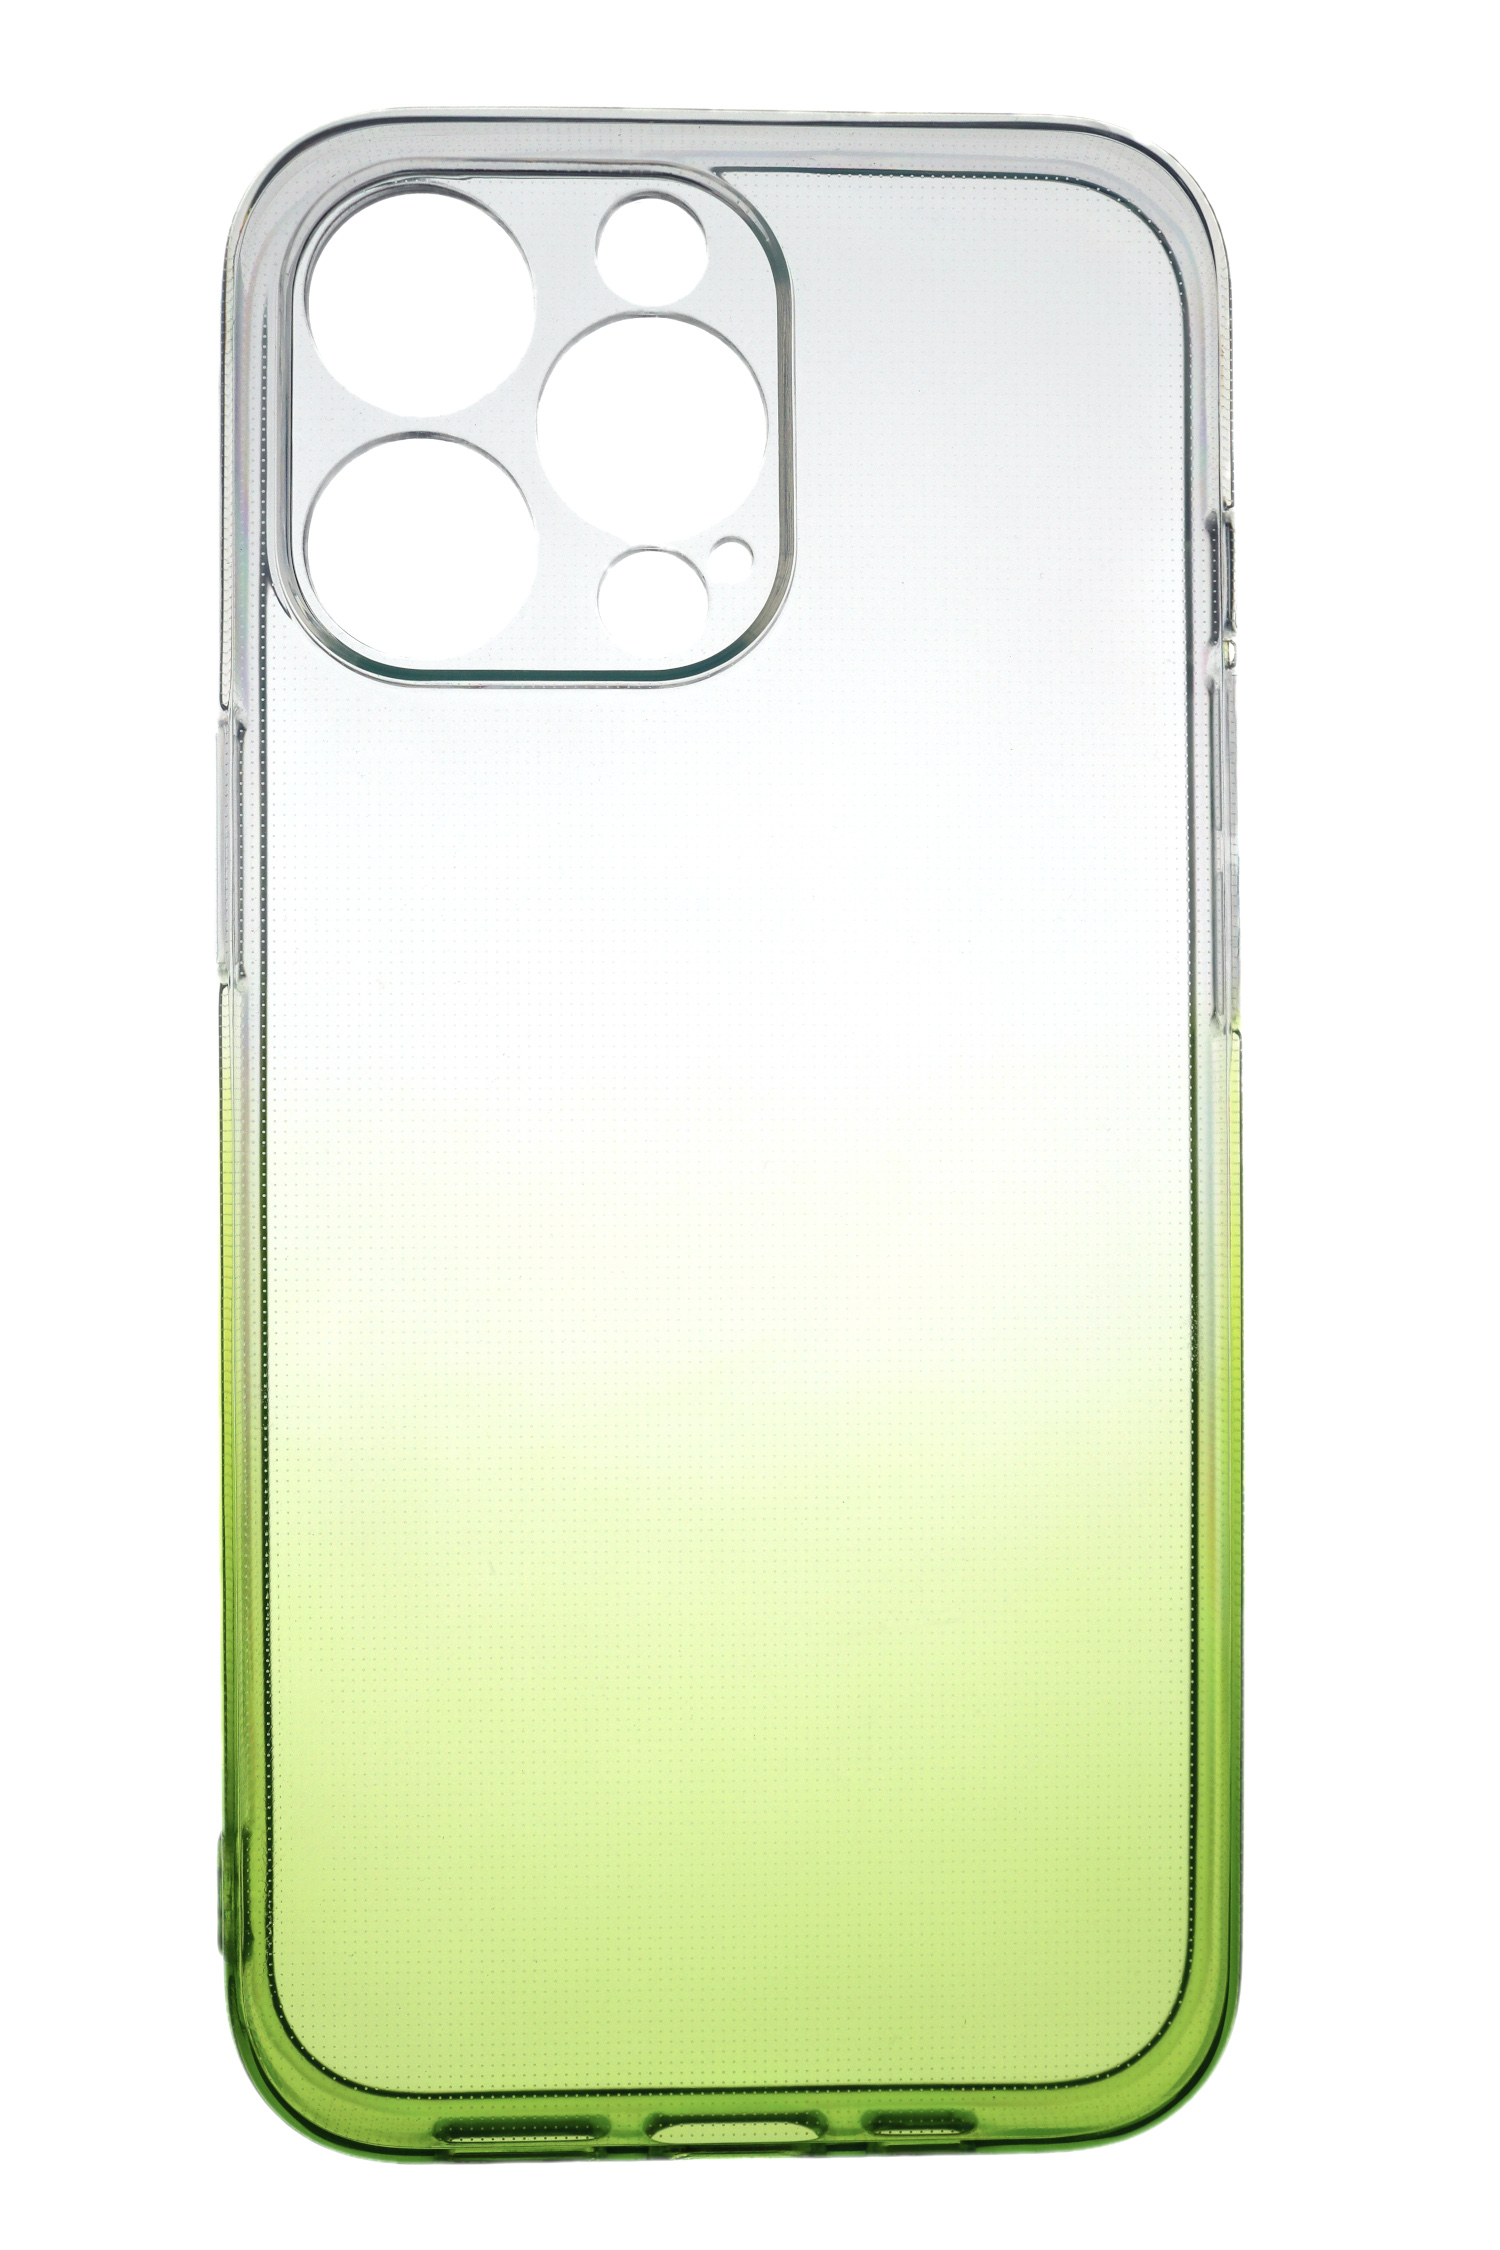 Case Pro 2.0 Max, Grün, Apple, mm Strong, Transparent Backcover, 14 TPU JAMCOVER iPhone